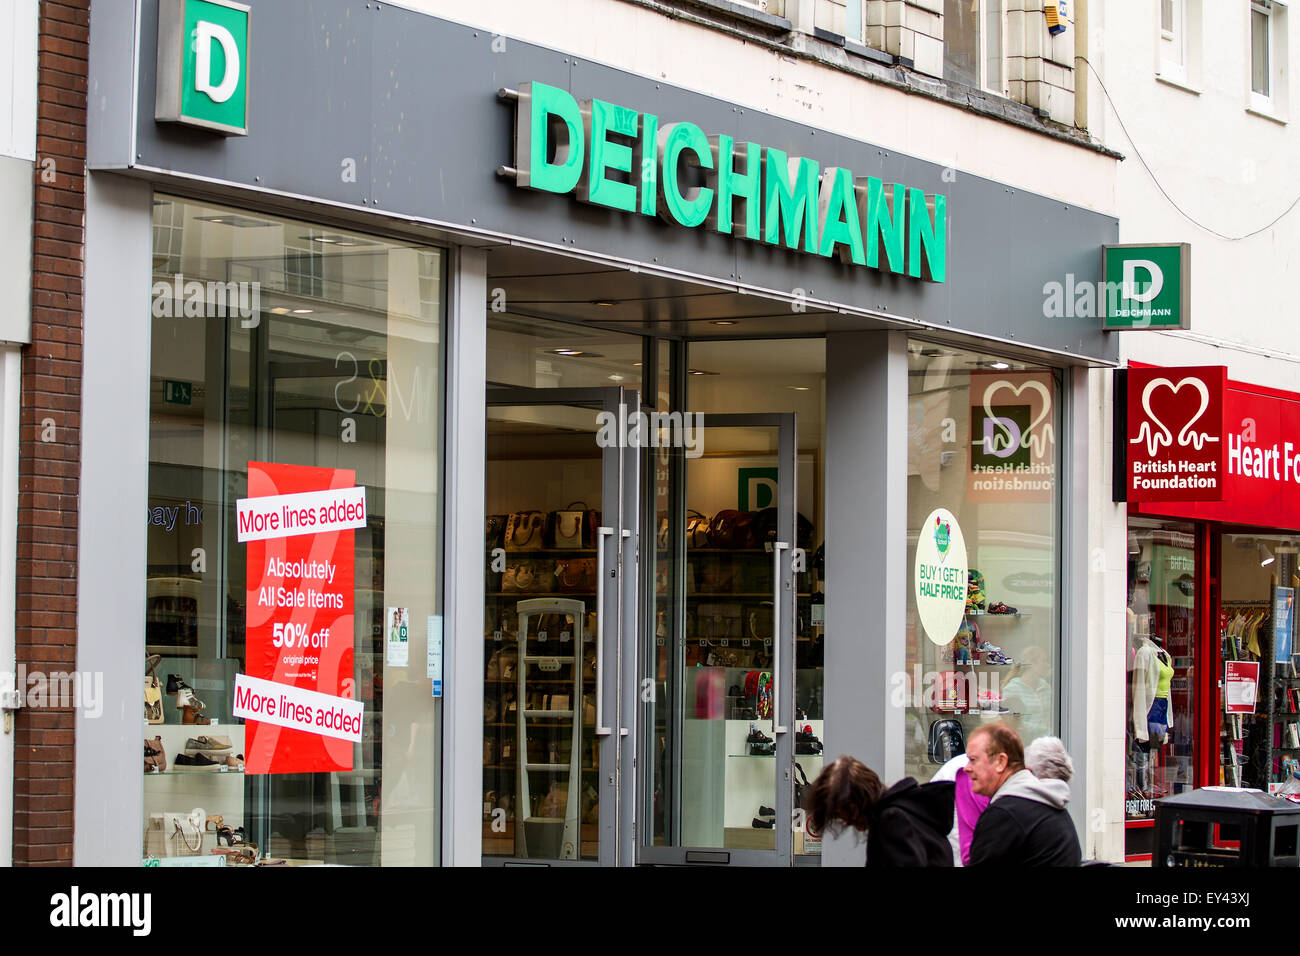 Dundee, Scotland, UK. 21st July, 2015. Sales: Mid Summer Sales in Dundee. German shoe company Deichmann along the Murraygate advertising sales 50% reductions on their products. The Heinrich Deichmann-Schuhe GmbH &